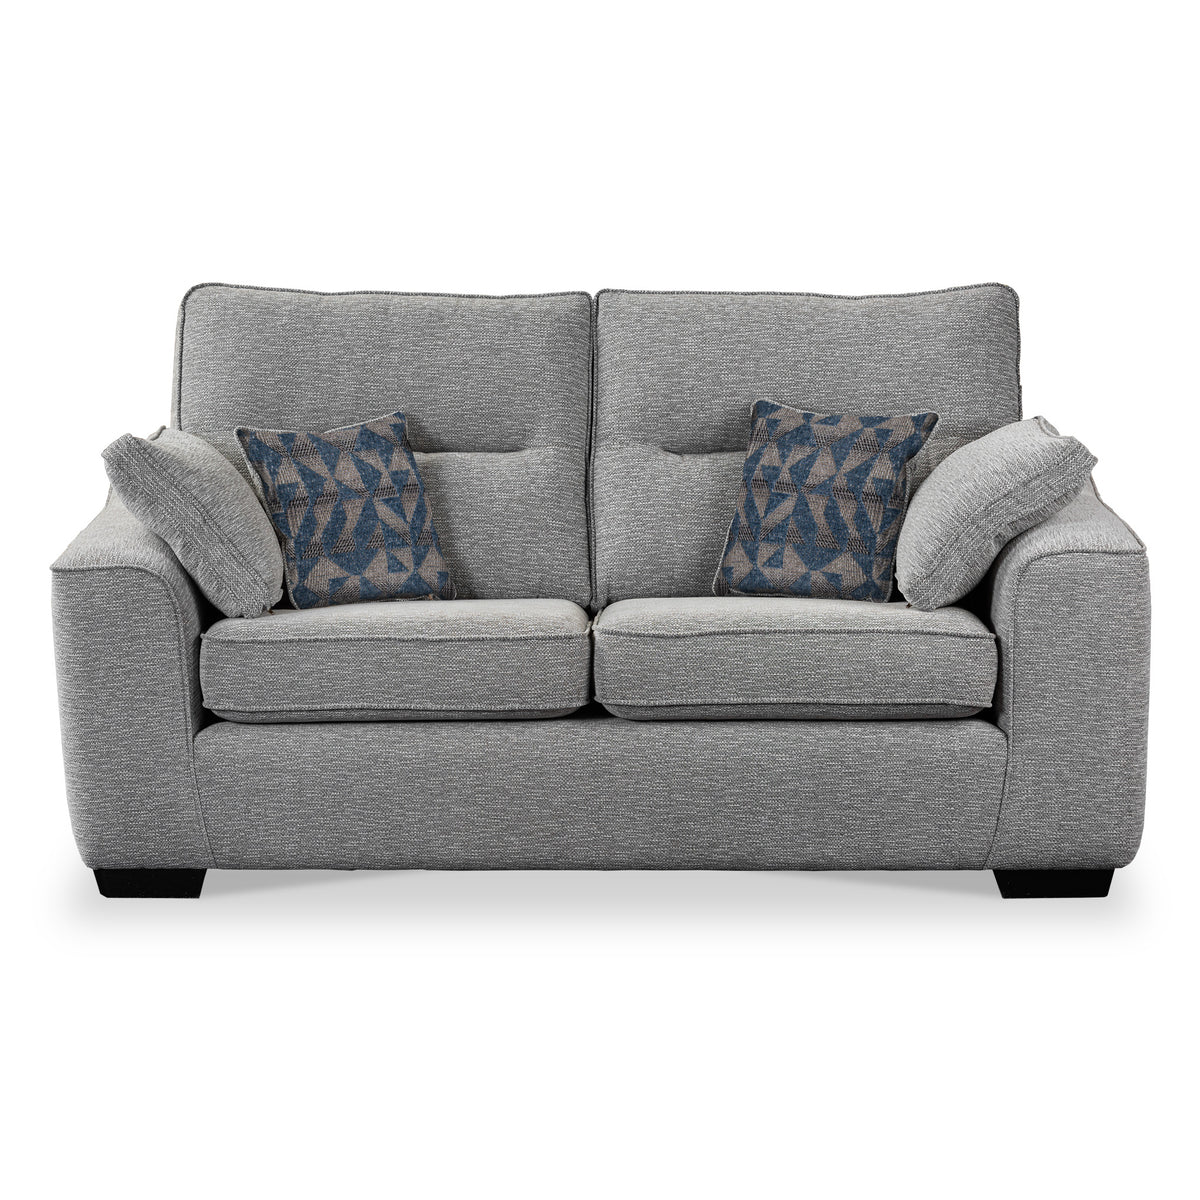 Sudbury Oatmeal 2 Seater Sofabed with Aegean Scatter Cushions from Roseland Furniture